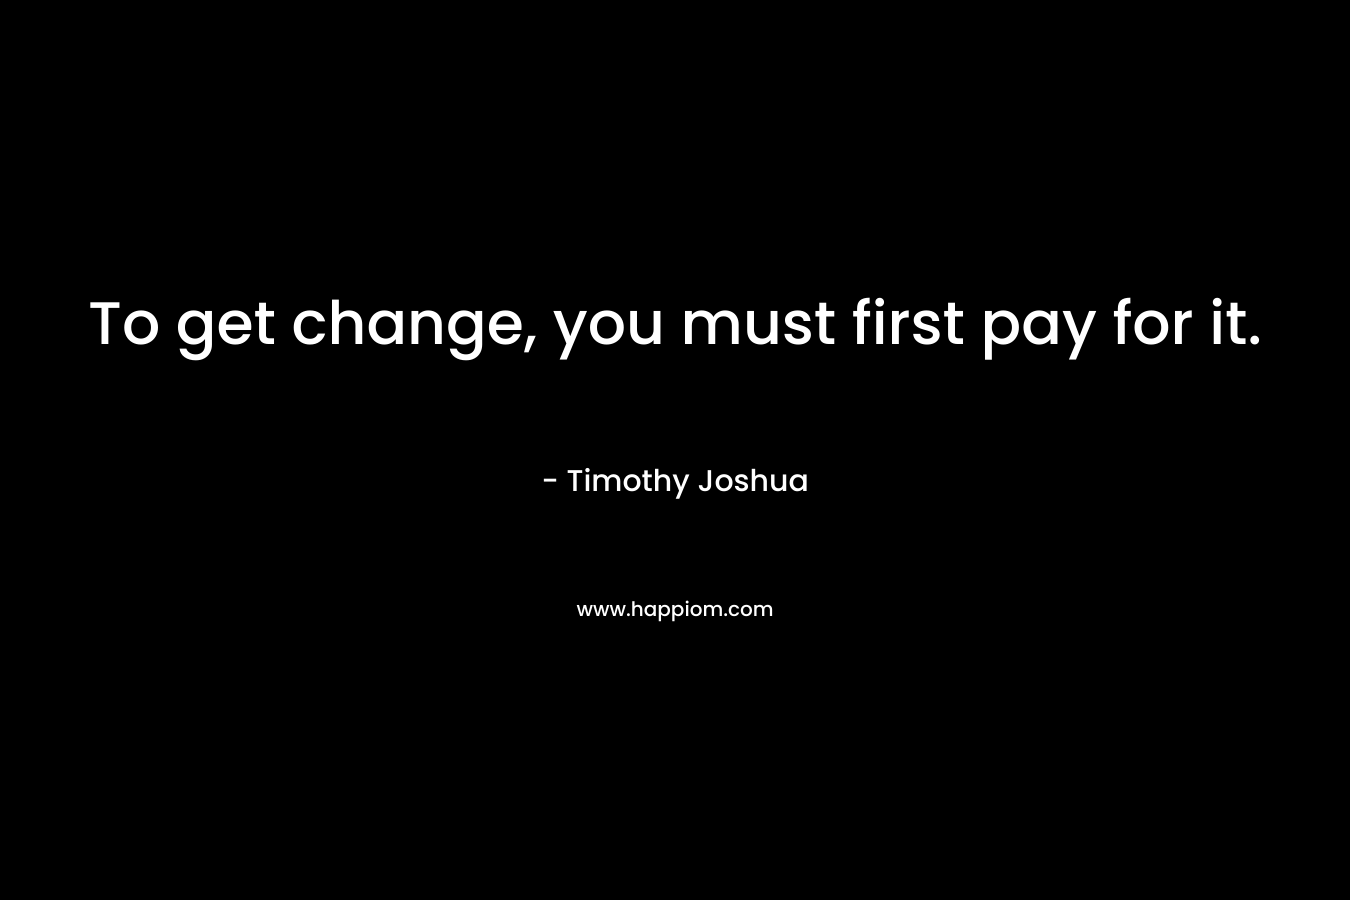 To get change, you must first pay for it.